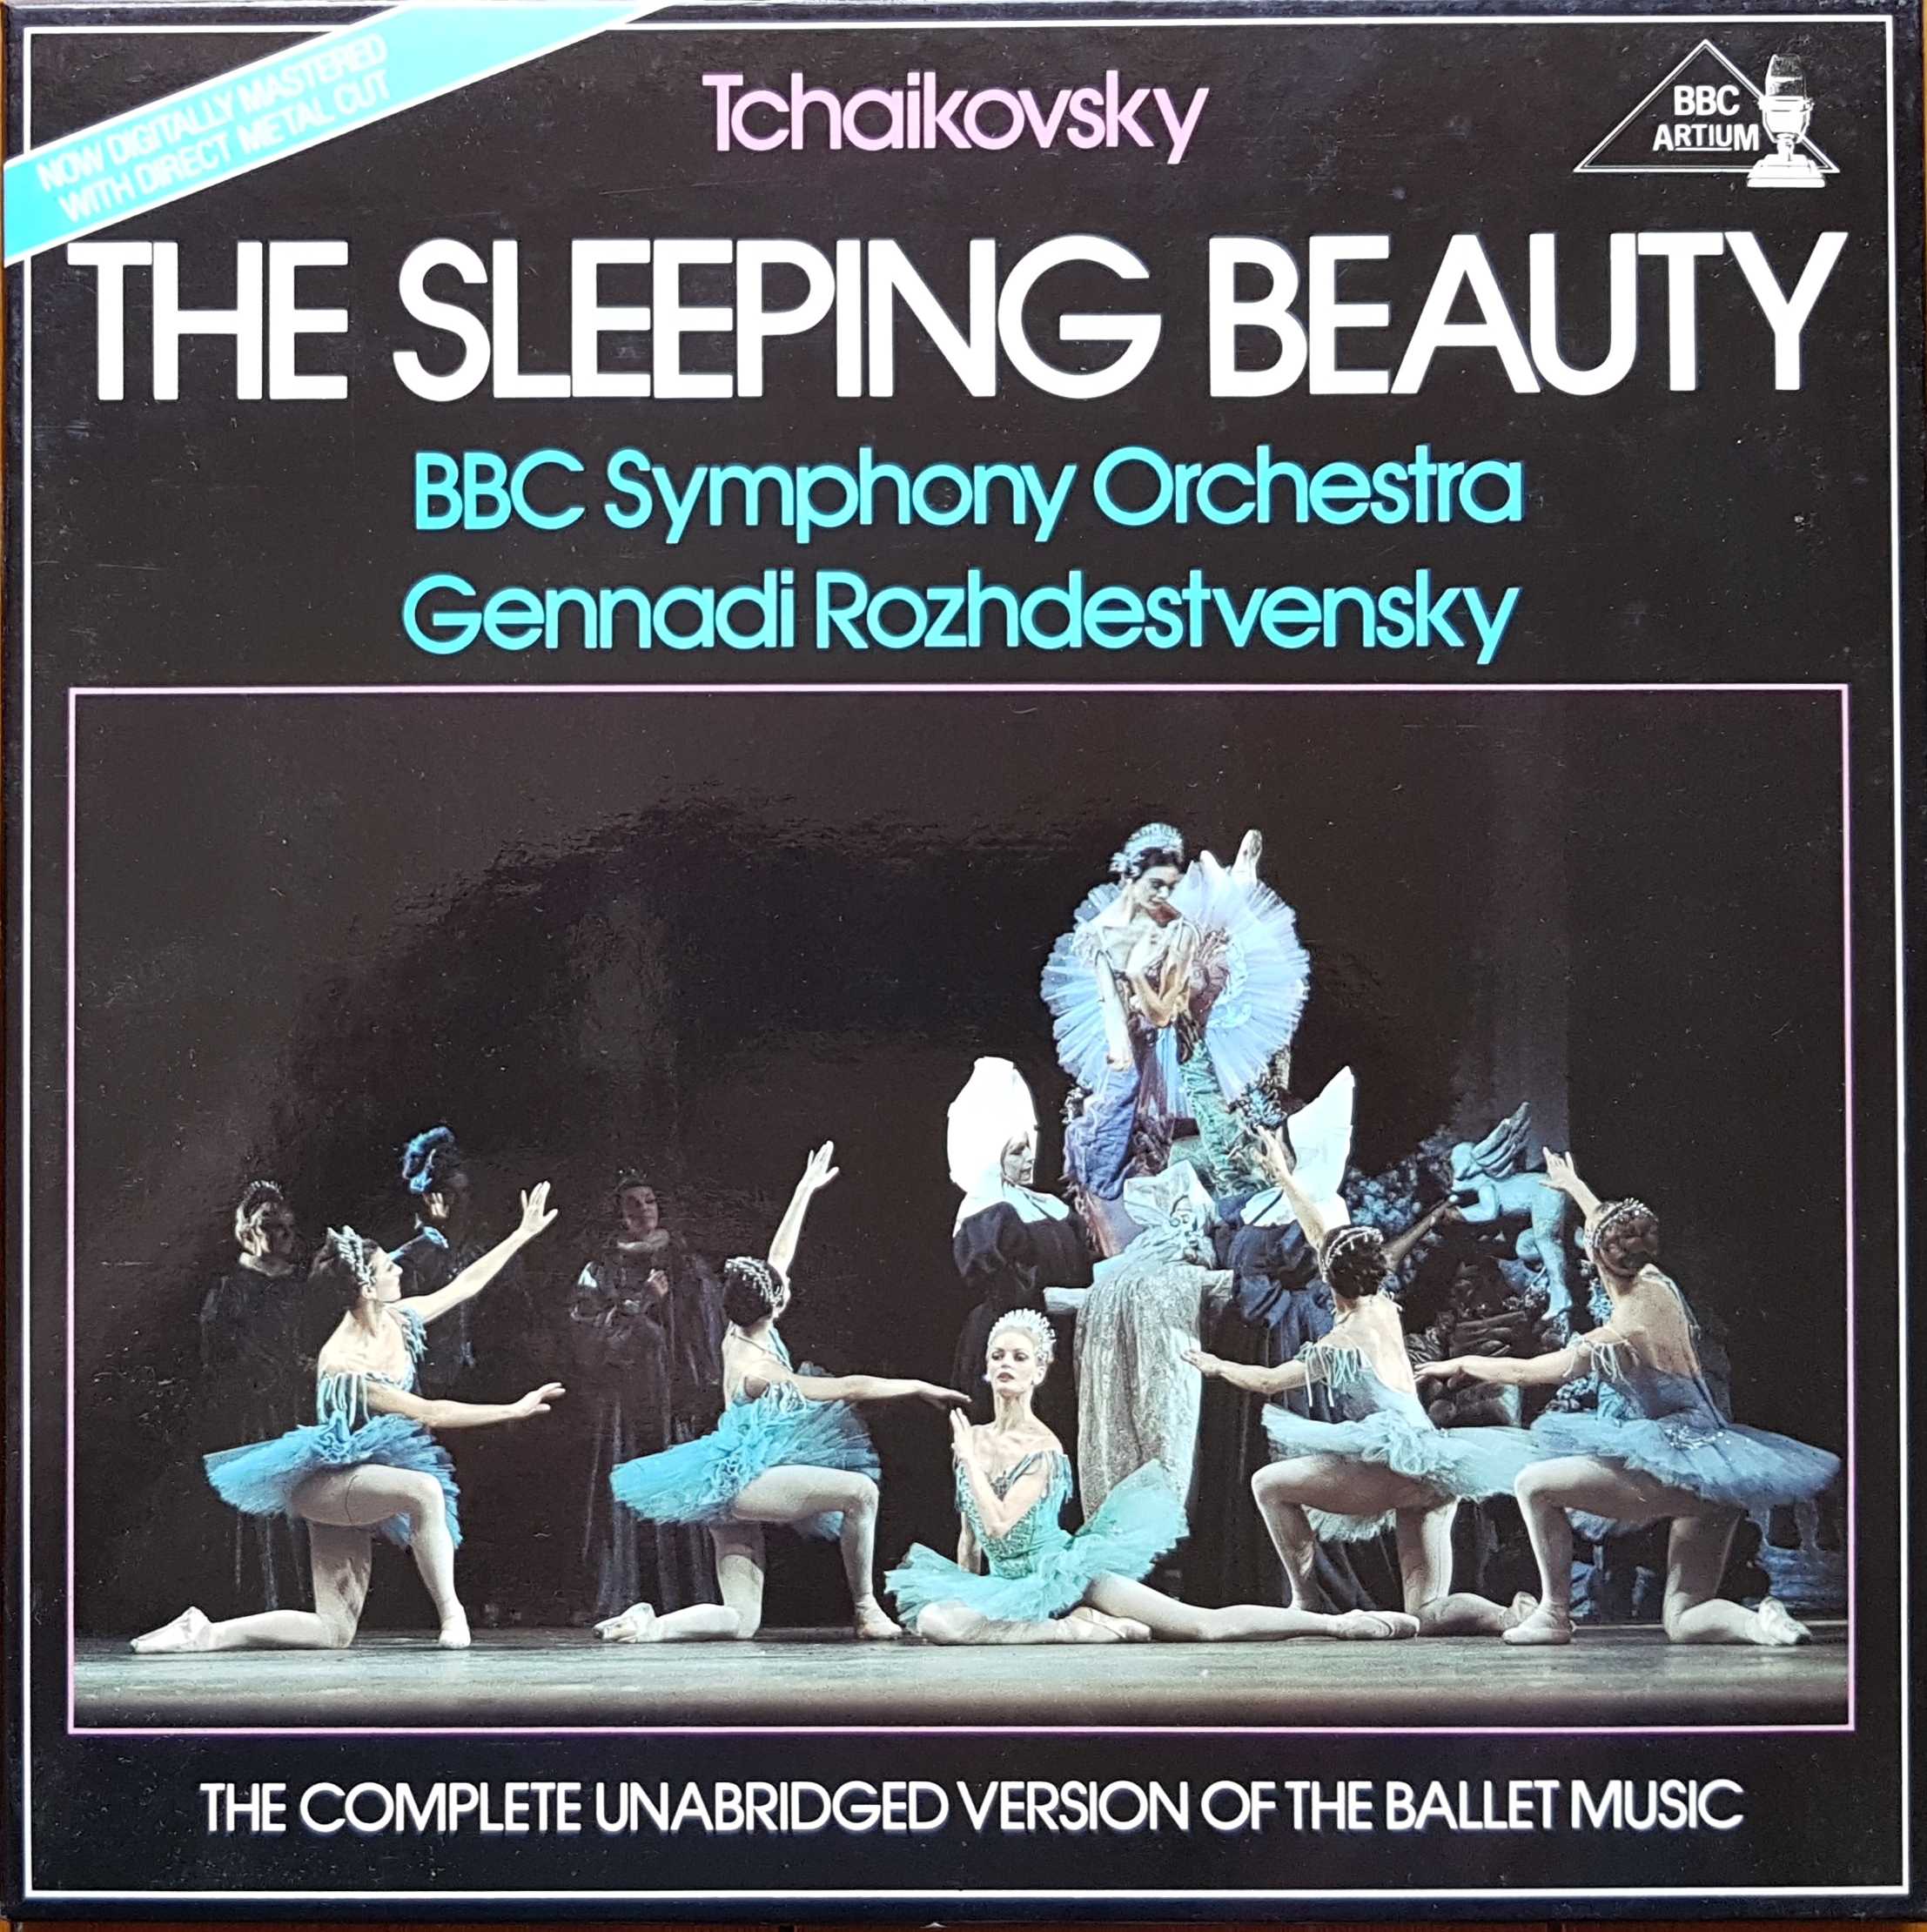 Picture of BBC 3003 The sleeping beauty - Digital version by artist Tchaikovsky from the BBC albums - Records and Tapes library